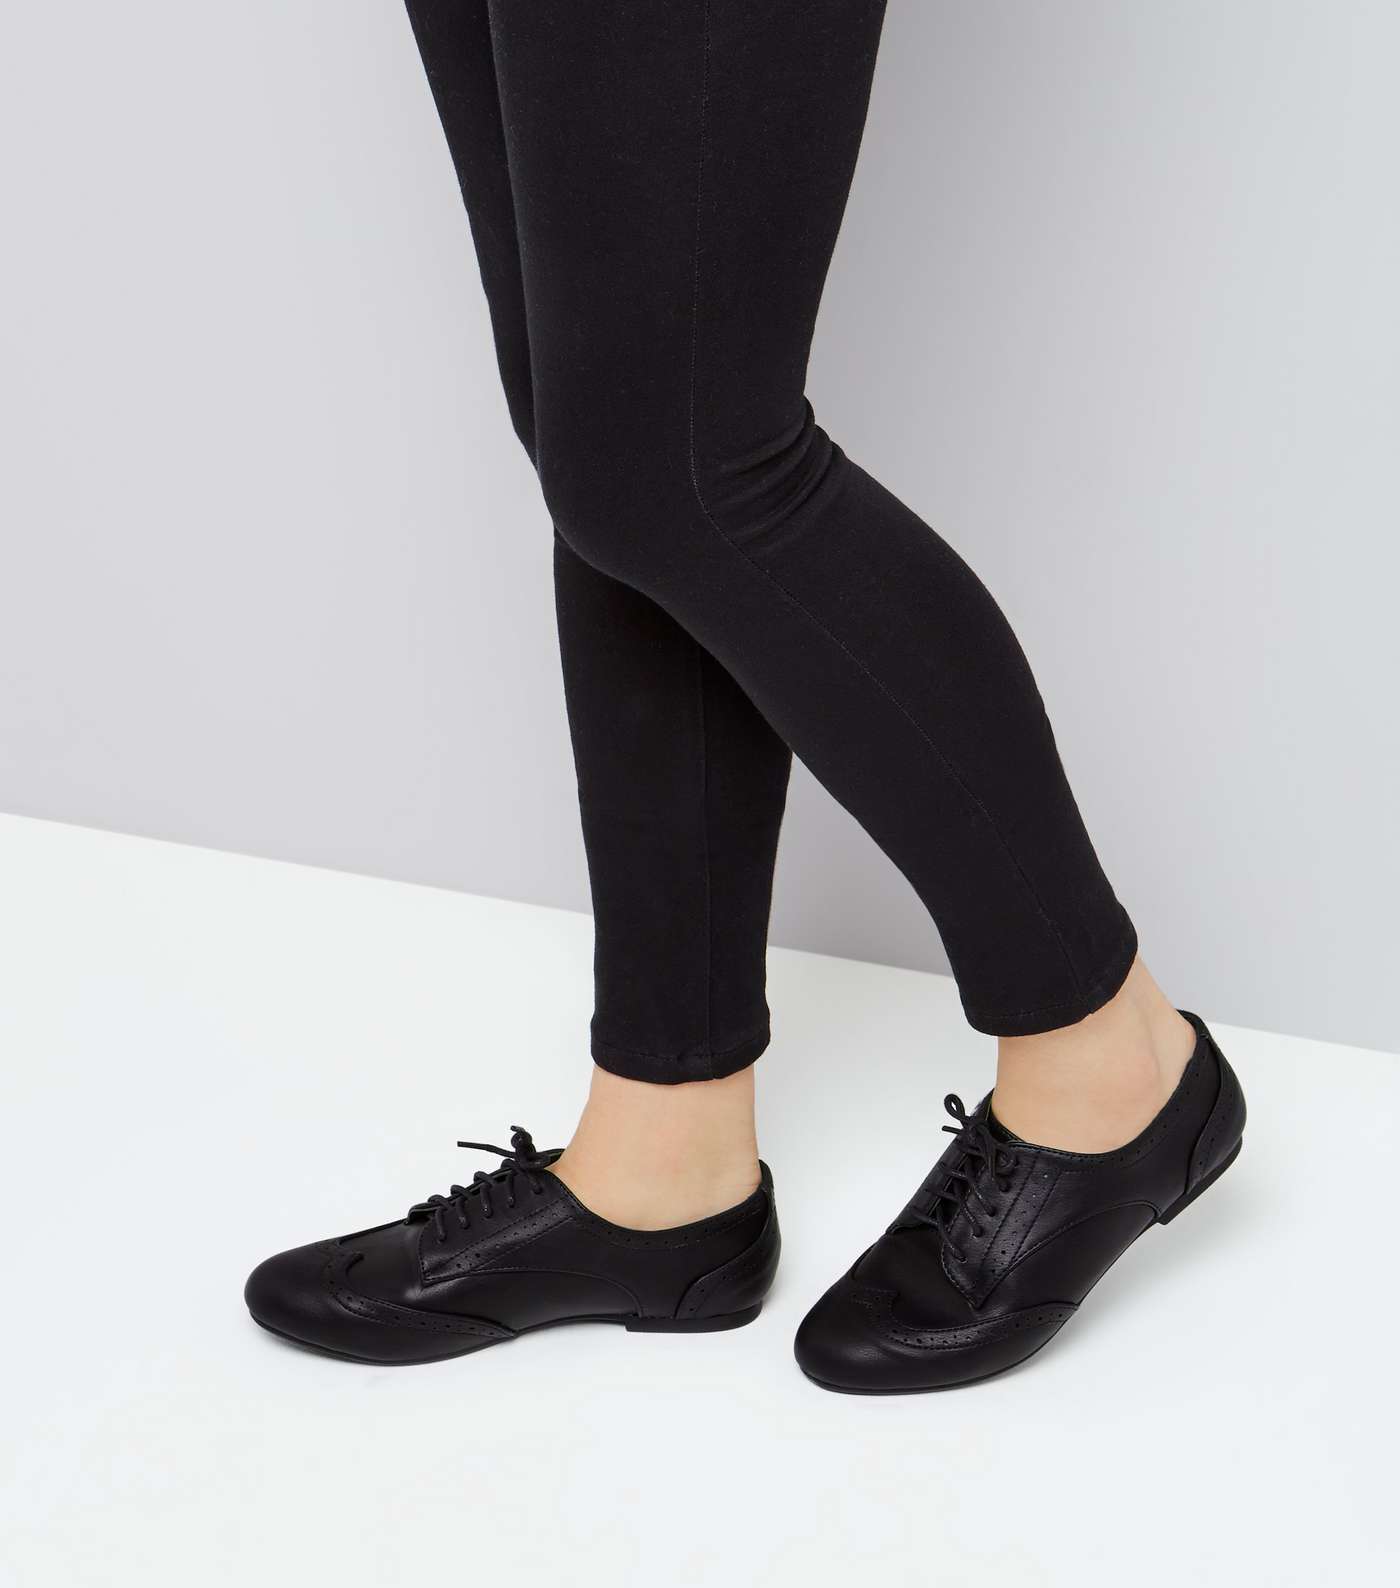 Girls Black Lace Up Brogues Image 3